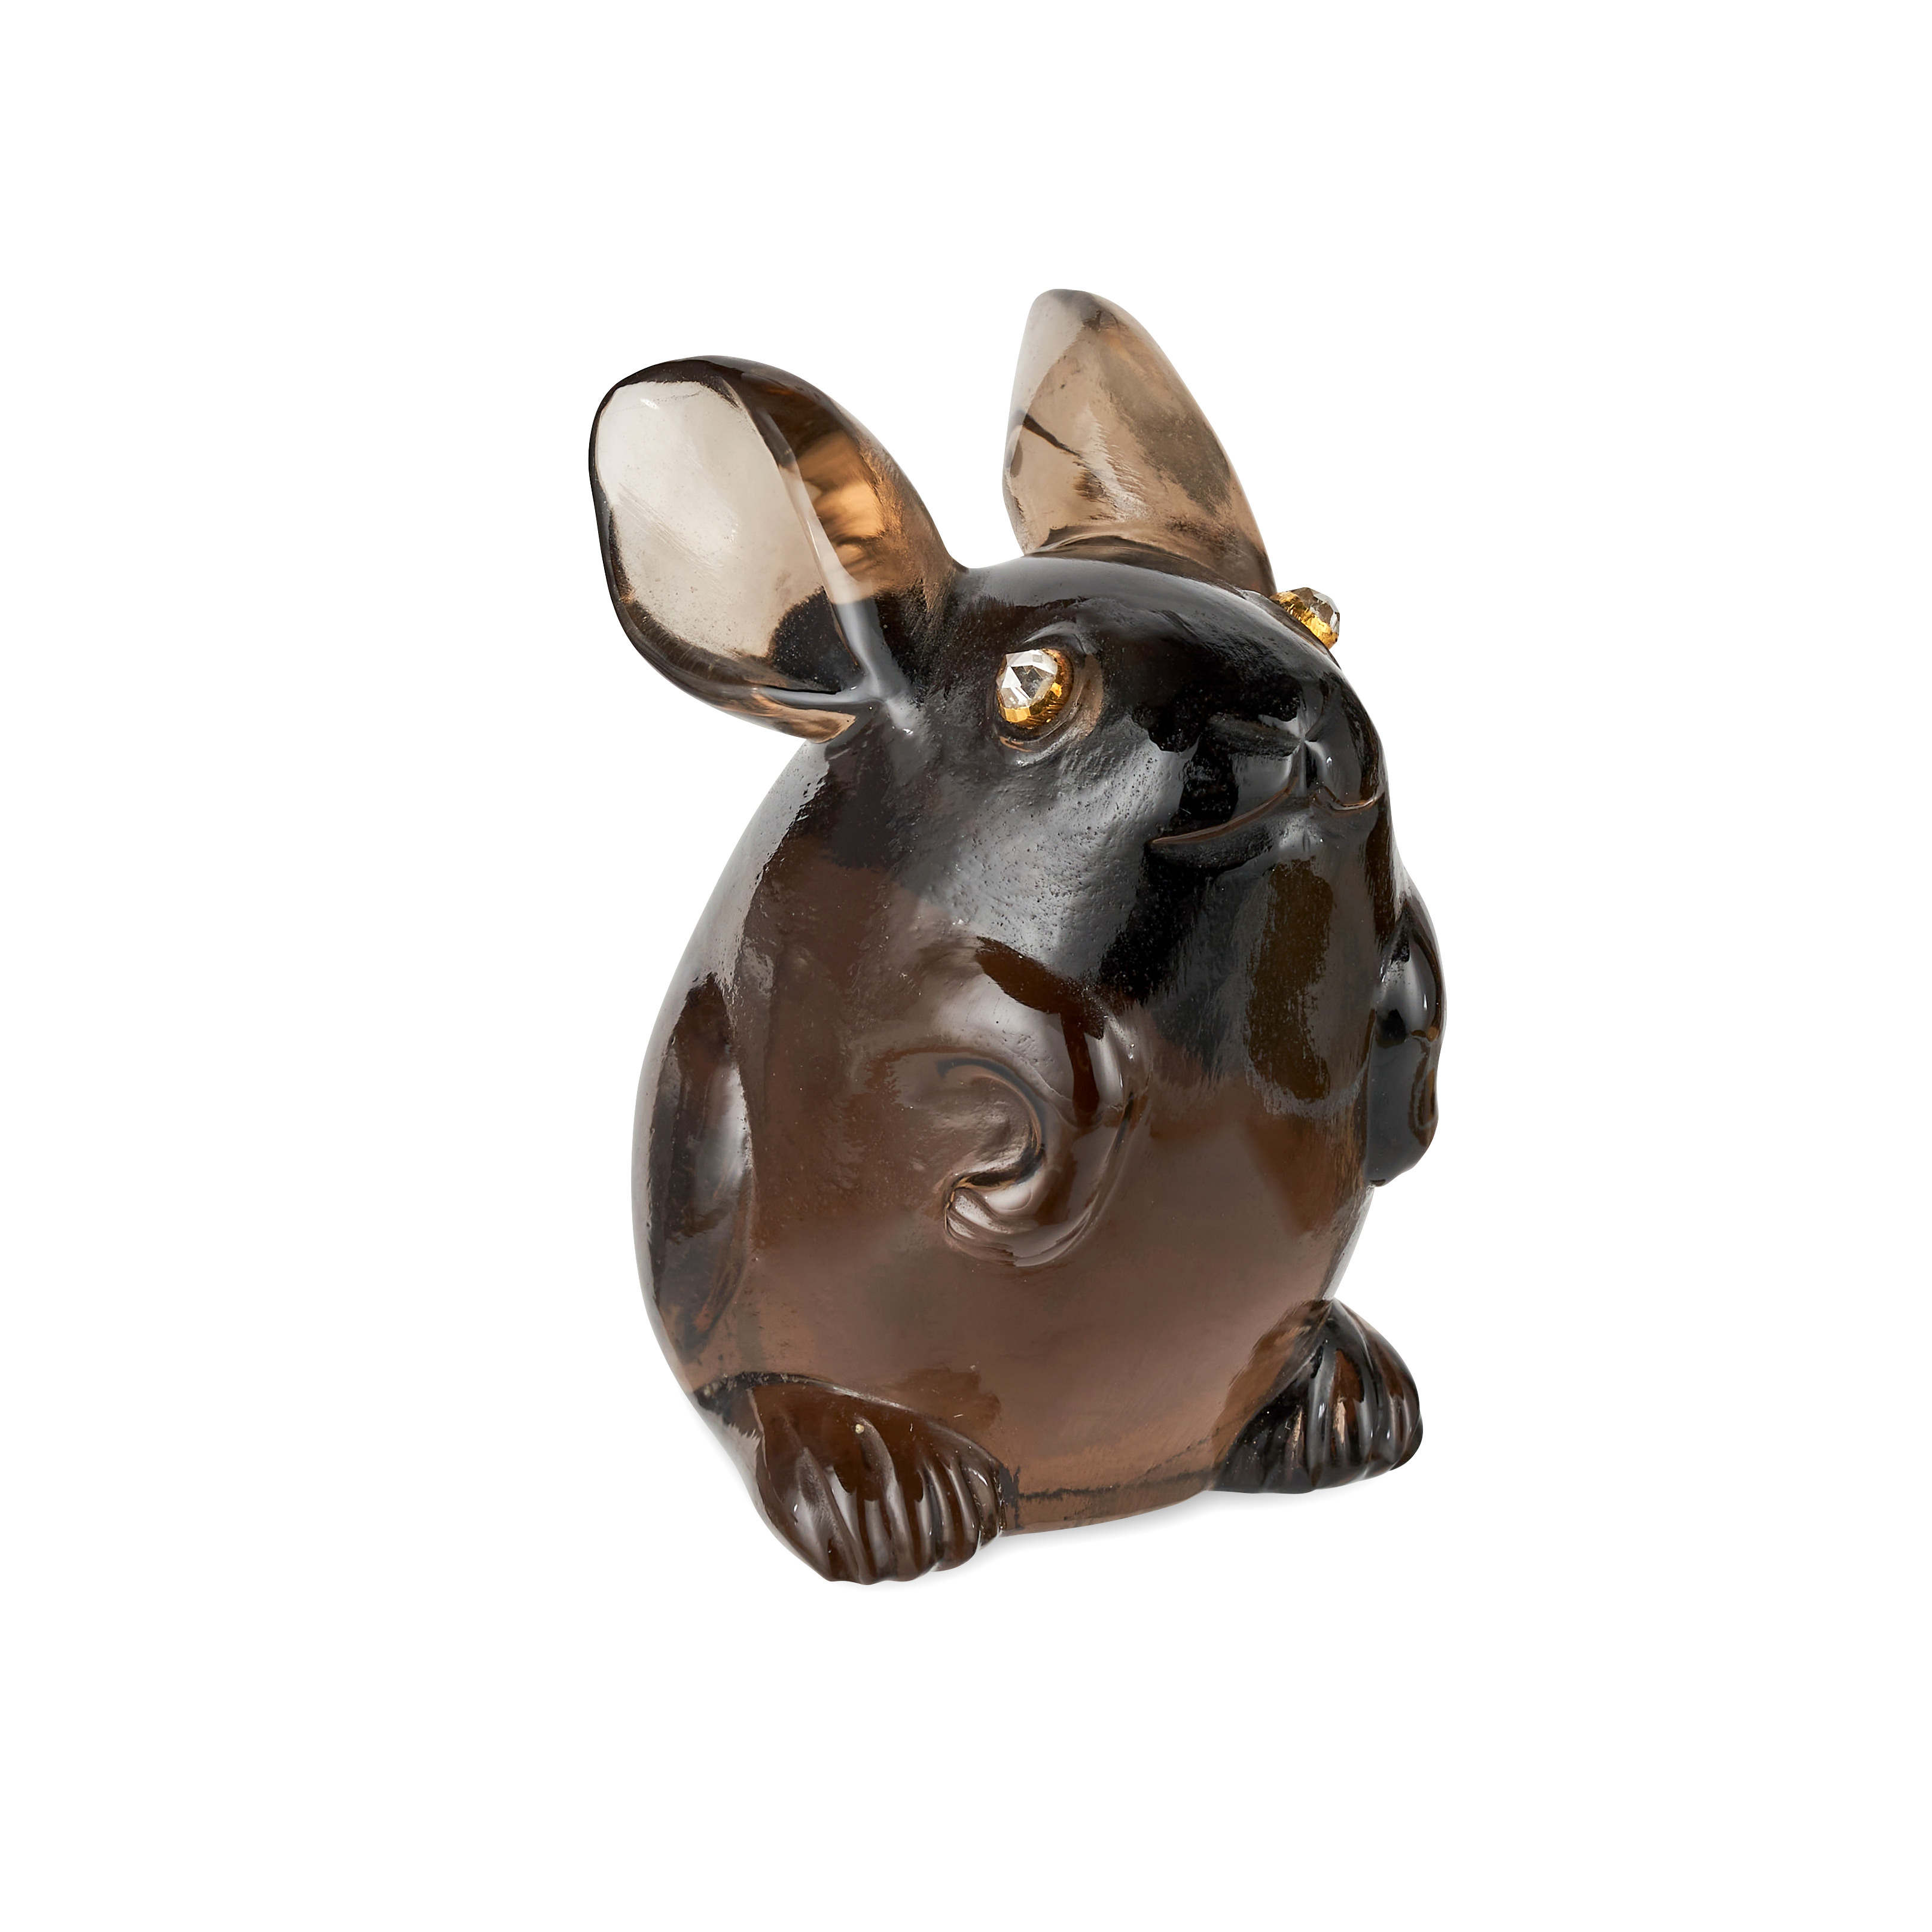 FABERGE, A RARE ROYAL JEWELLED GOLD MOUNTED SMOKEY QUARTZ MODEL OF A BUNNY RABBIT, ST PETERSBURG ... - Image 7 of 9